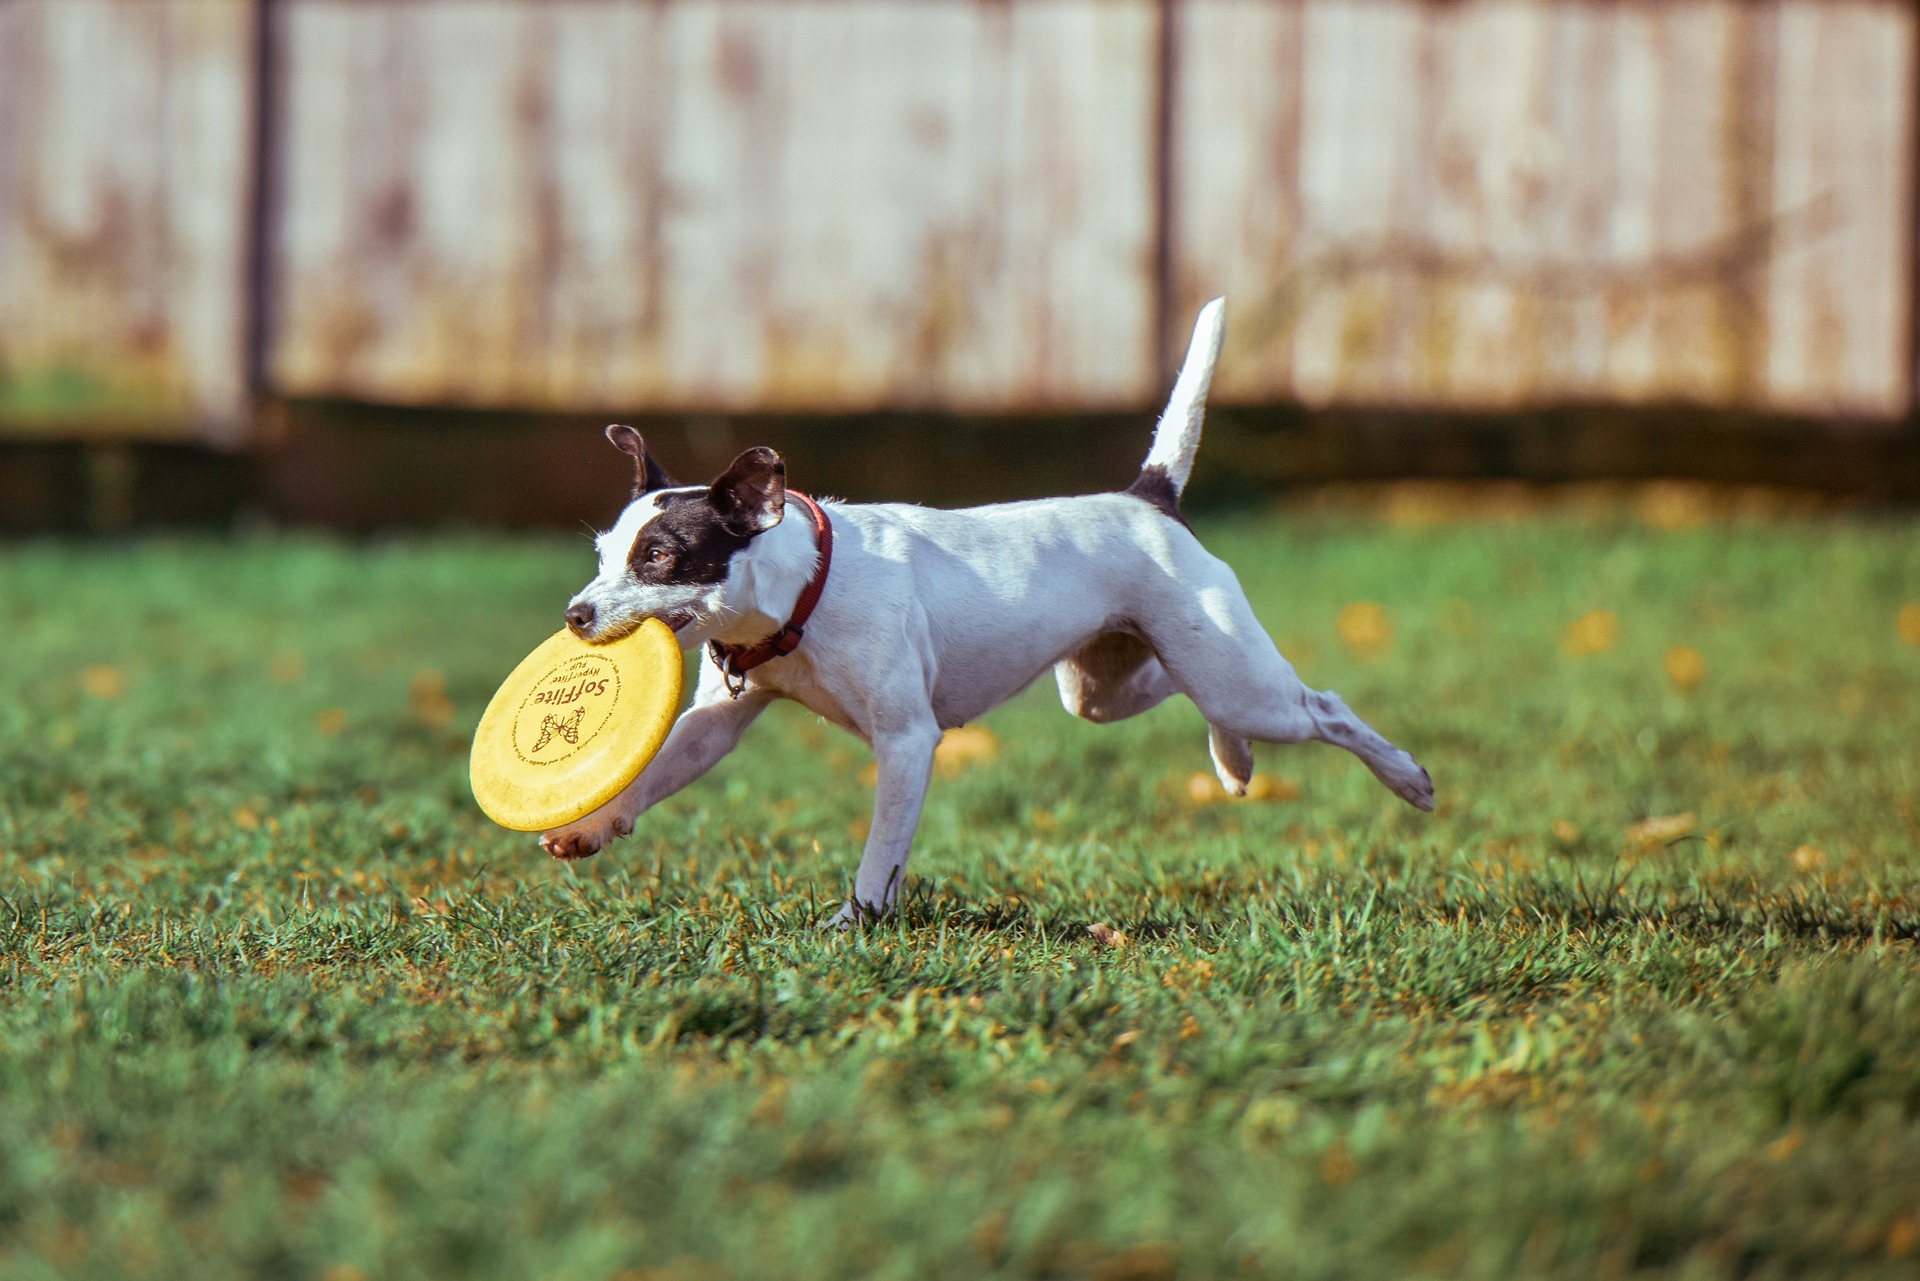 White dog carrying a yellow frisbee